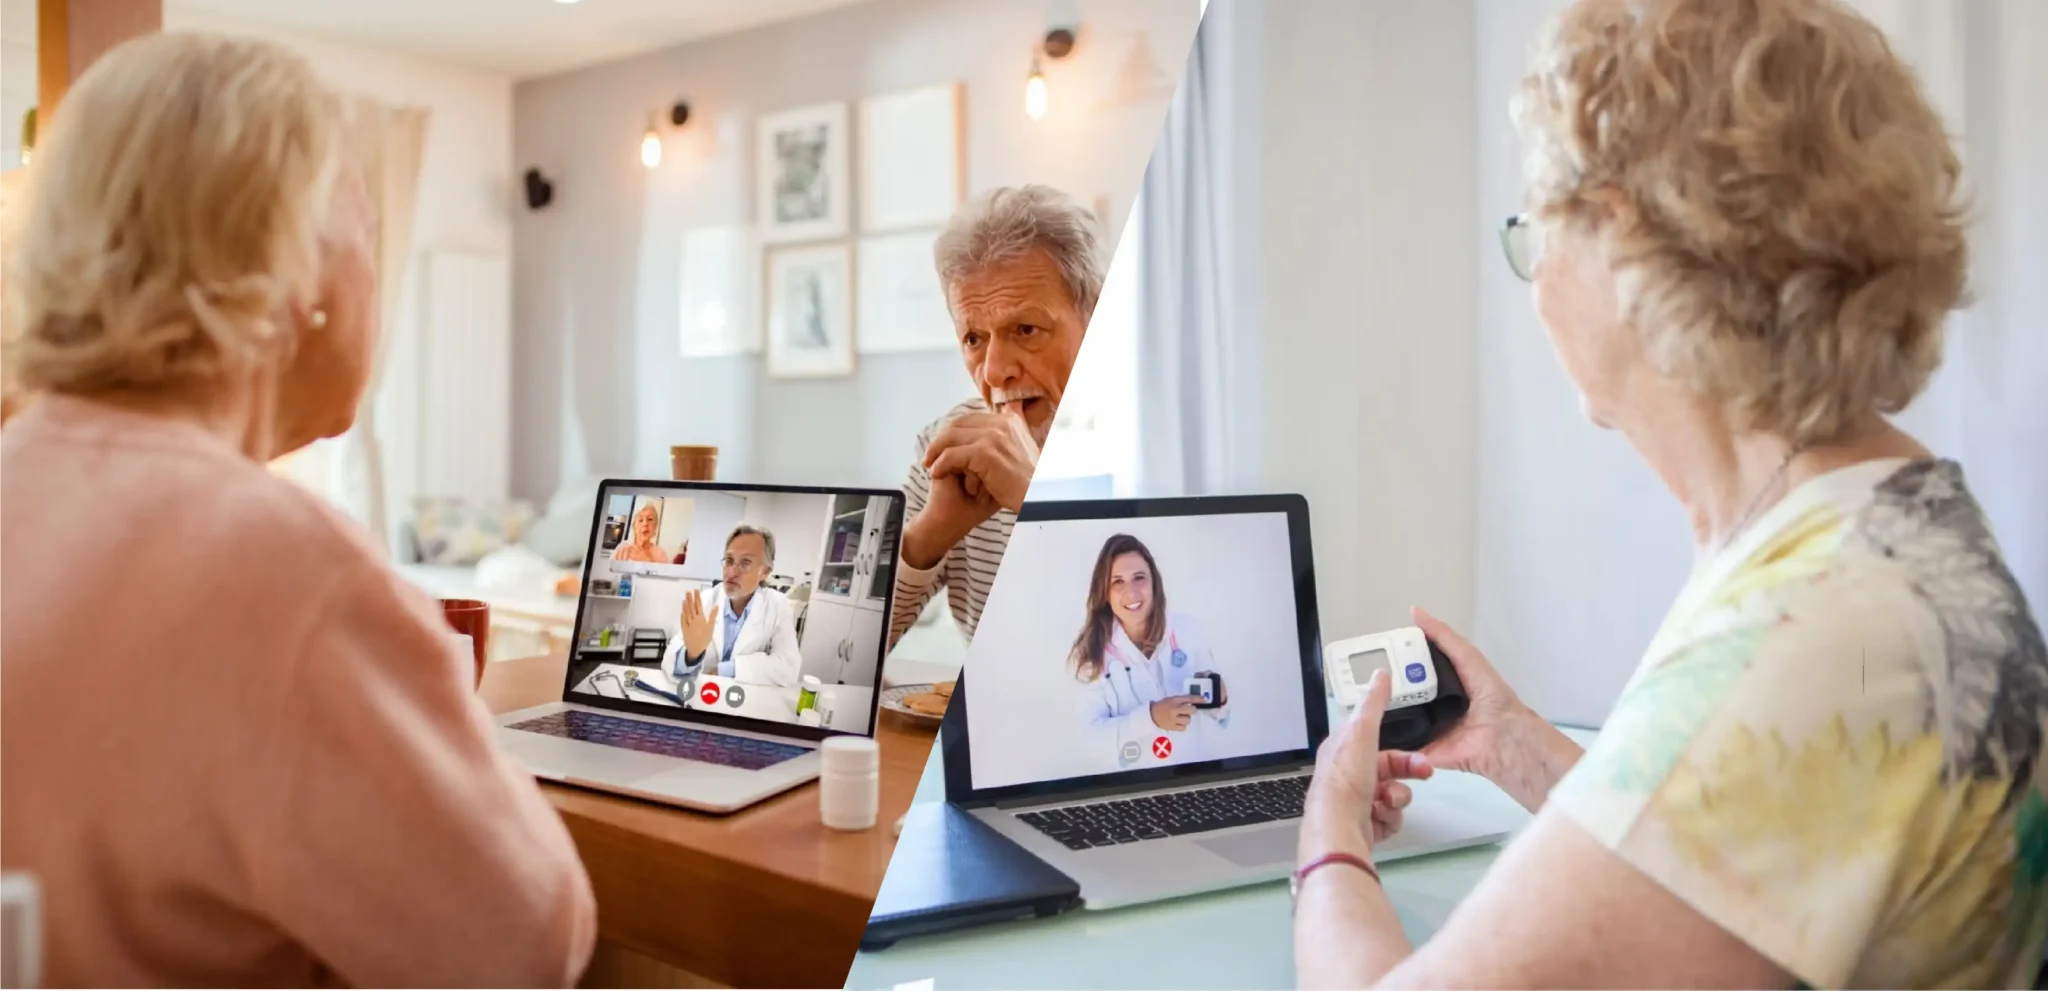 Challenges of telehealth in RPM